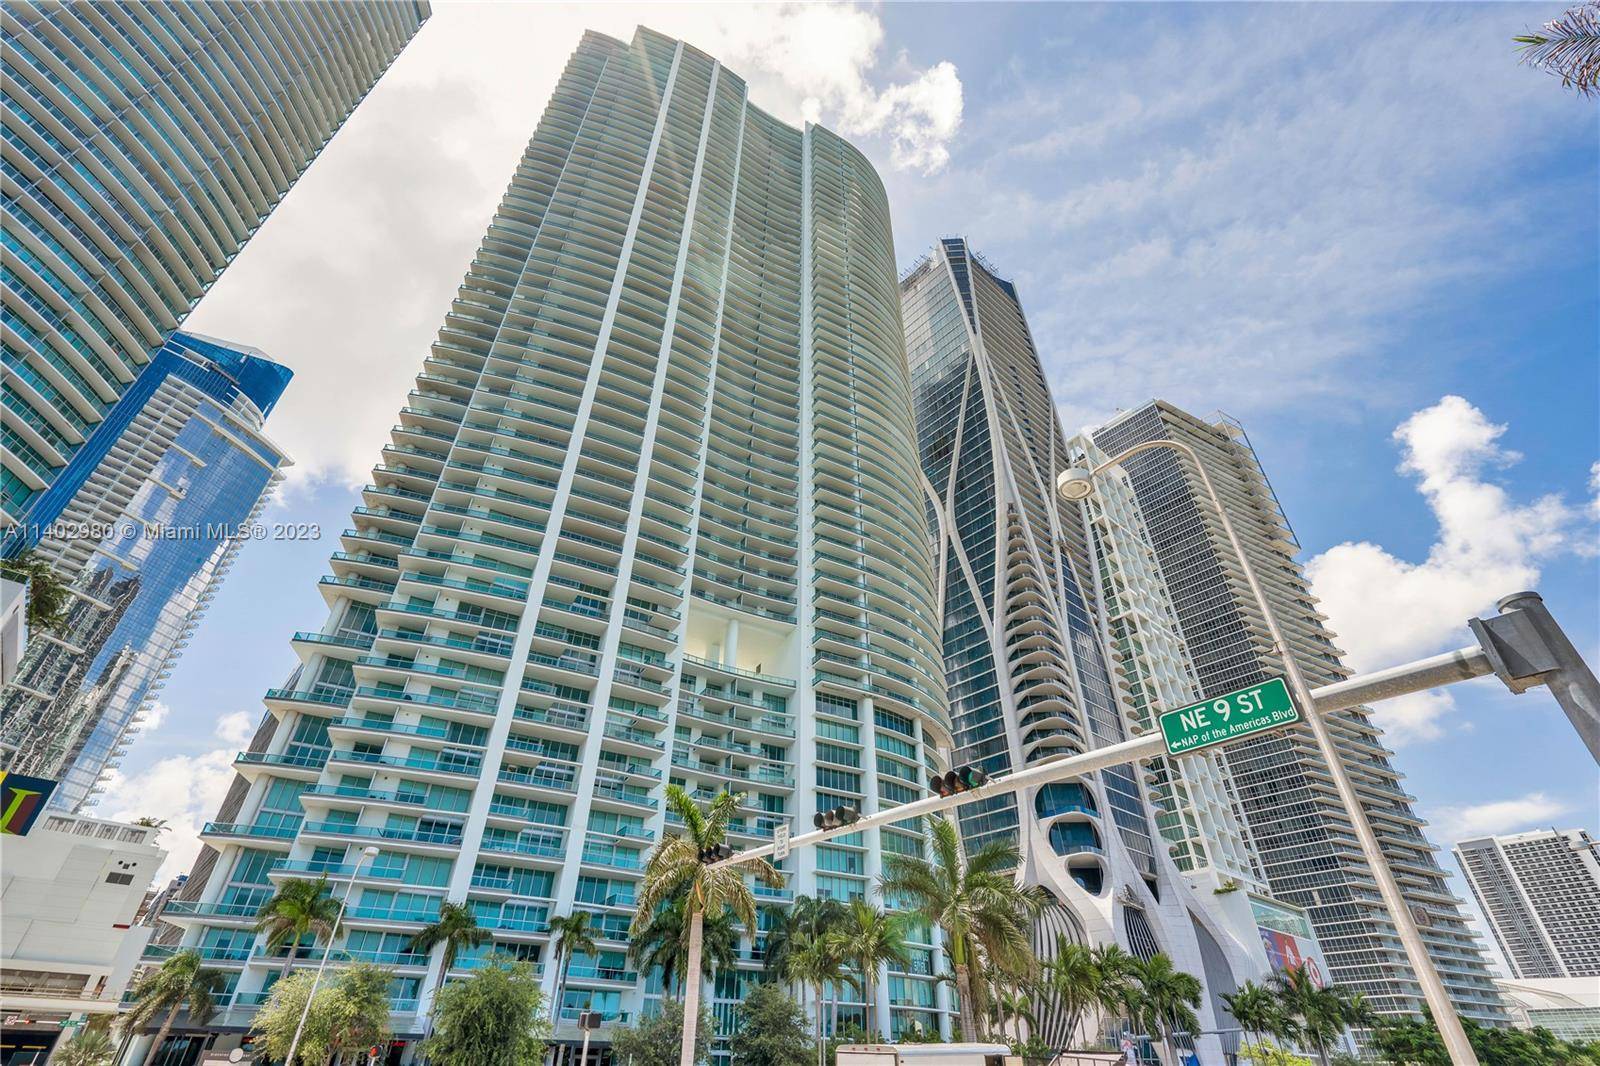 900 Biscayne Bay is a luxurious residential tower offering breathtaking views of Biscayne Bay, the Atlantic Ocean, and the vibrant City of Miami.